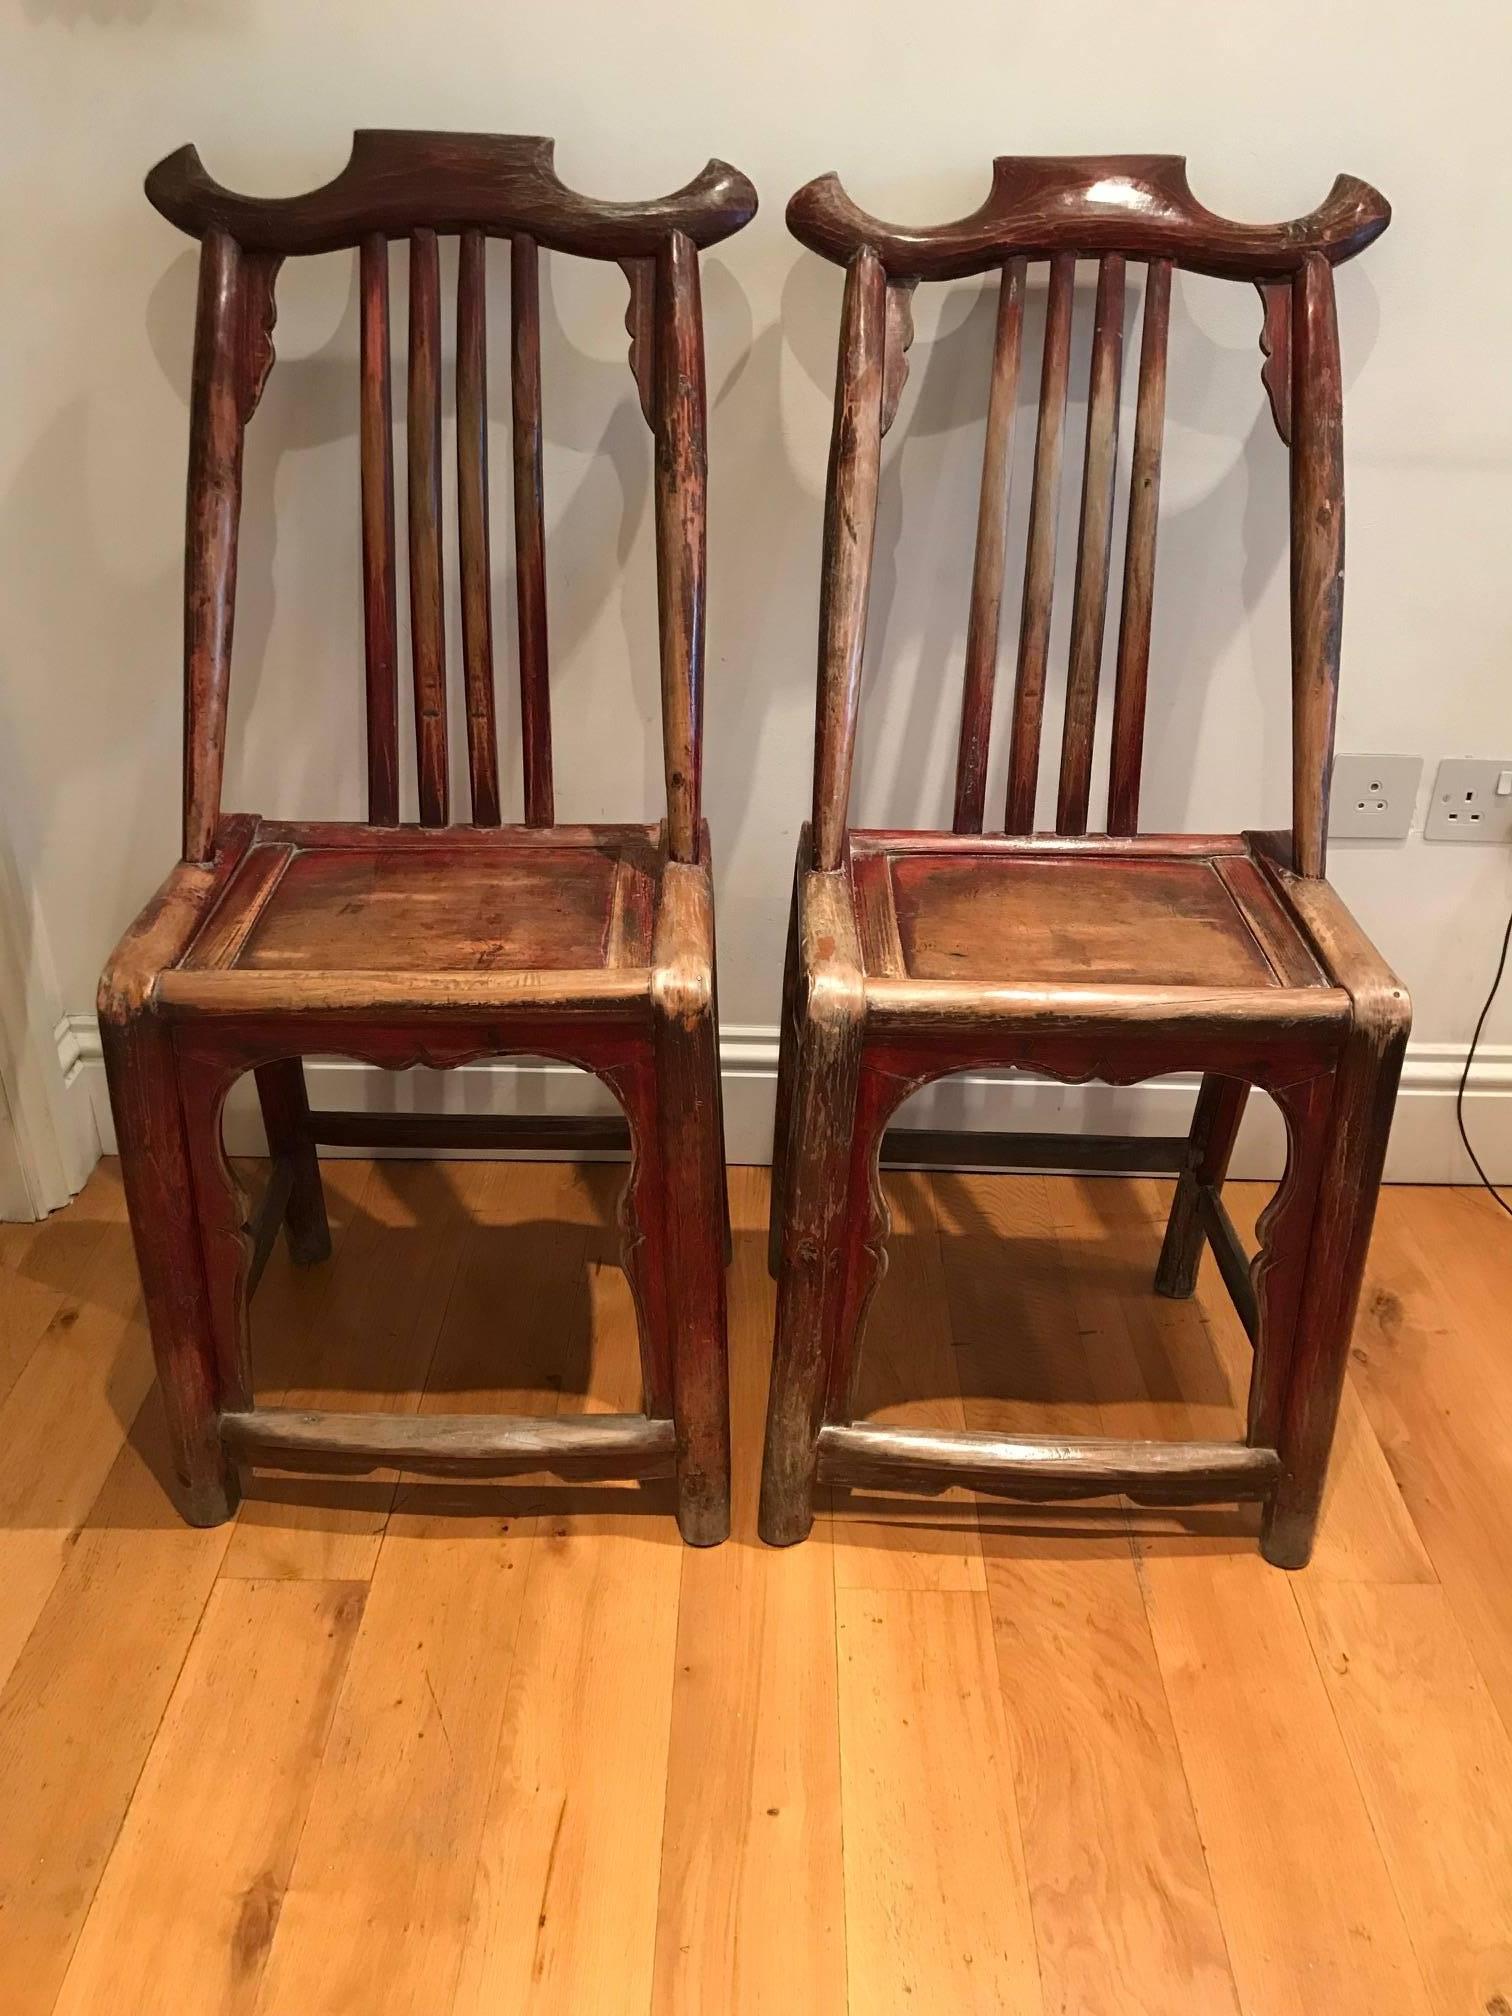 A pair of early 20th century highly decorative painted wood scroll chairs. Traces of original red coloring left with good signs of age and patination.